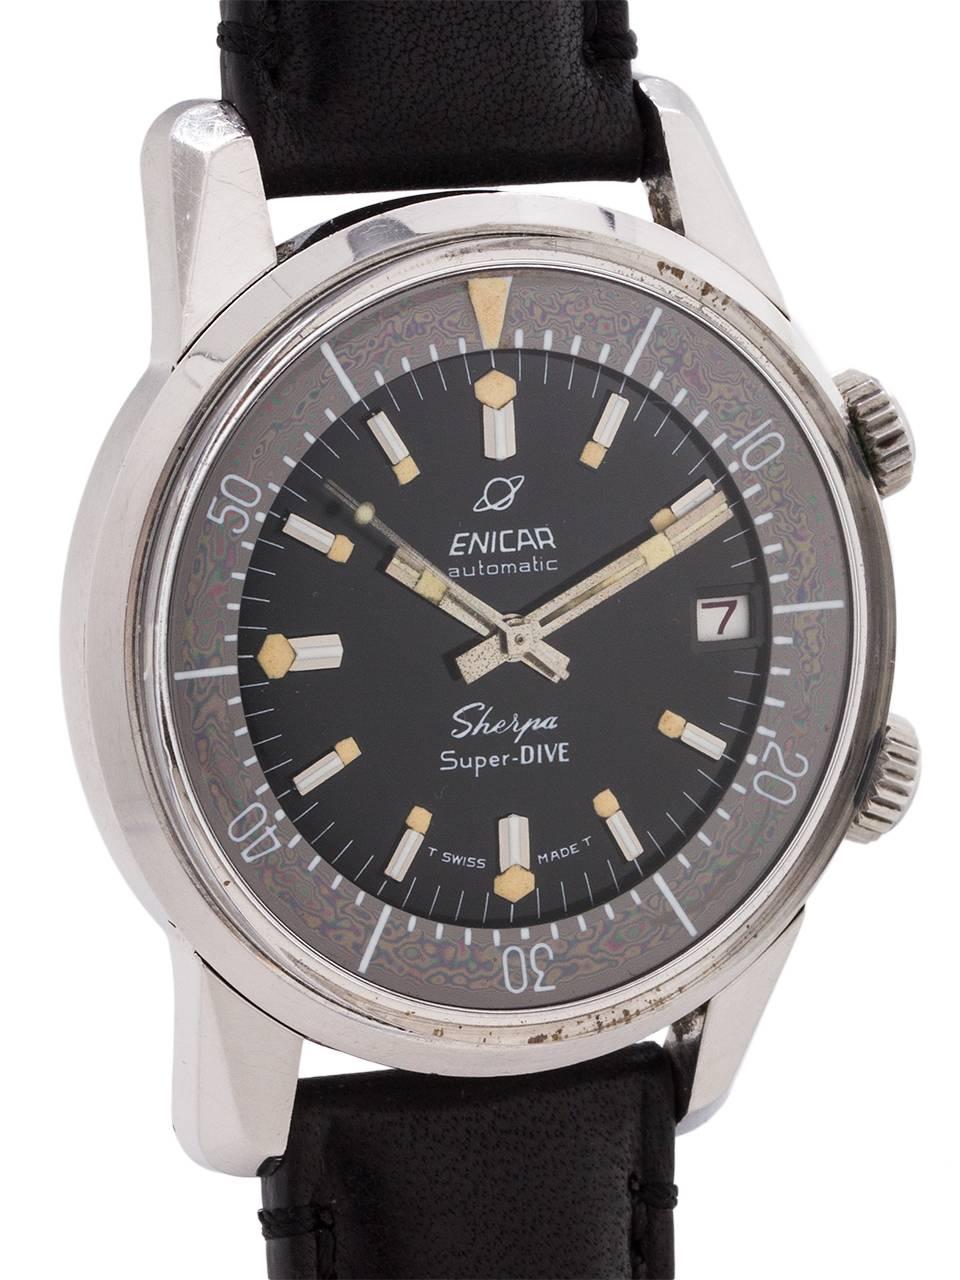 
Enicar stainless steel Sherpa Super-Dive automatic wind diver’s model circa 1970’s. Great looking 40mm water proof style case with screw down case back, smooth aged grey internal rotating bezel, and heavy angled lugs. Original matte black dial with